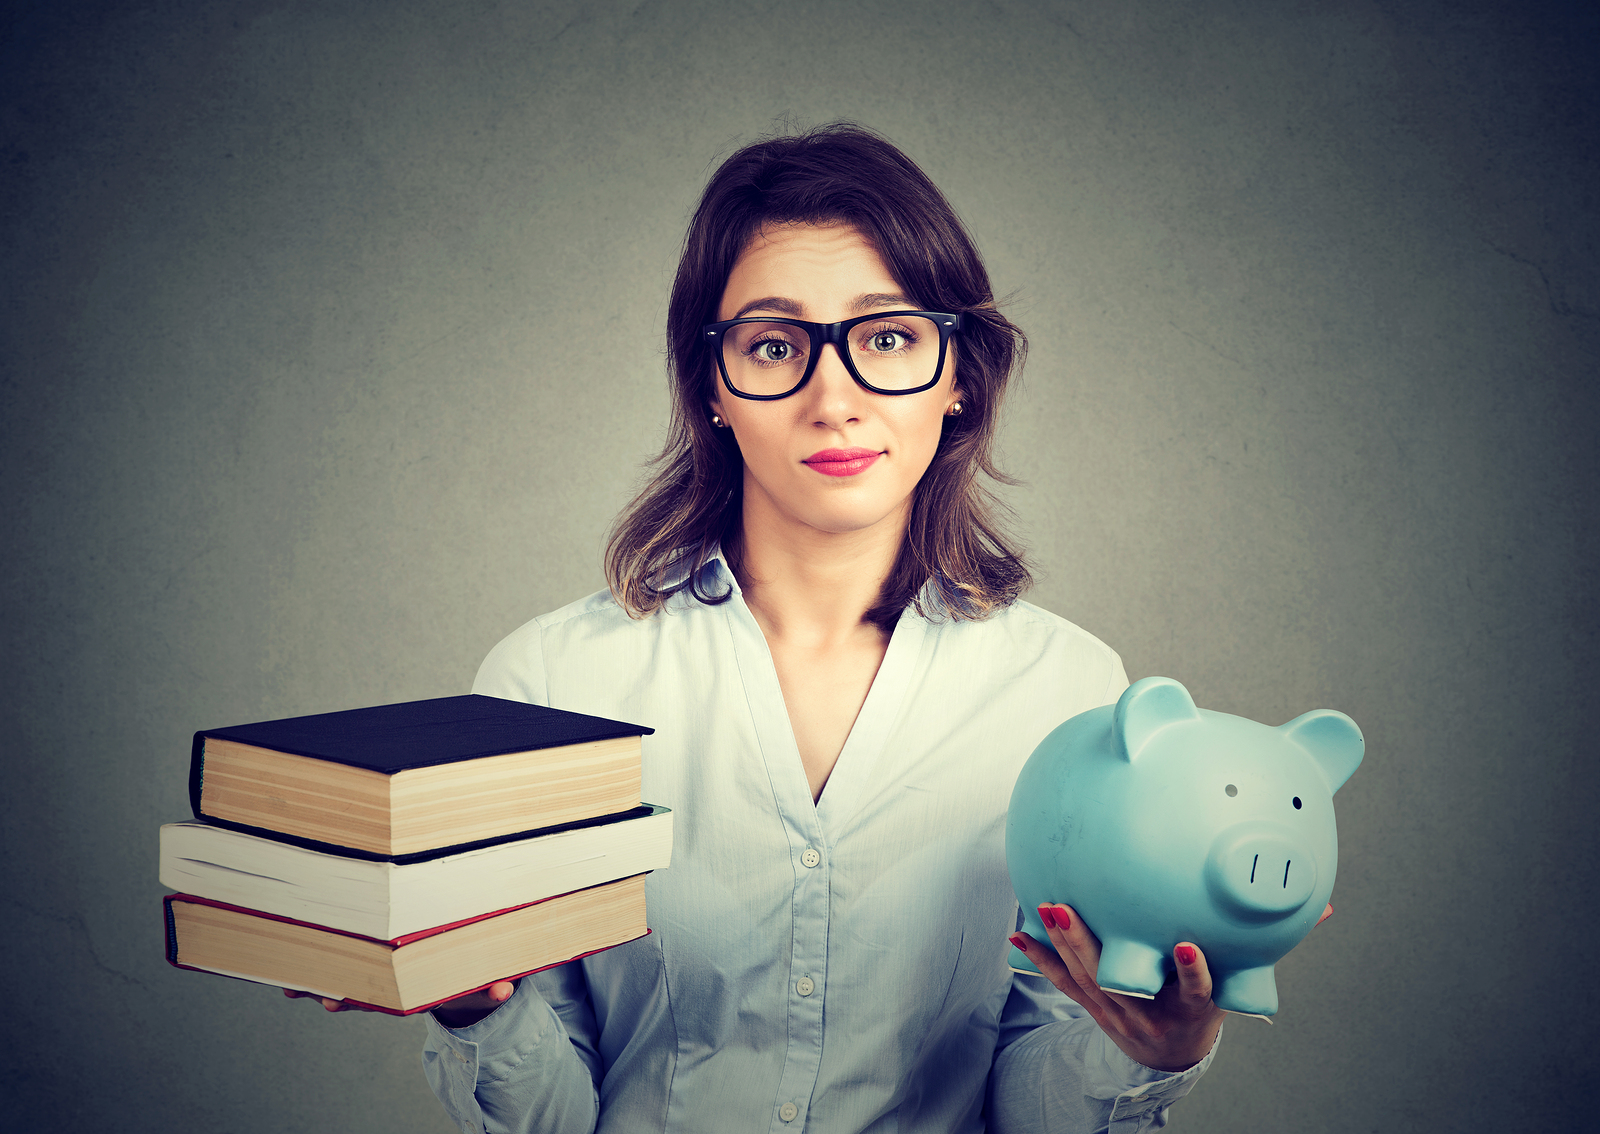 The Role of Credit Unions in the Student Loan Crisis